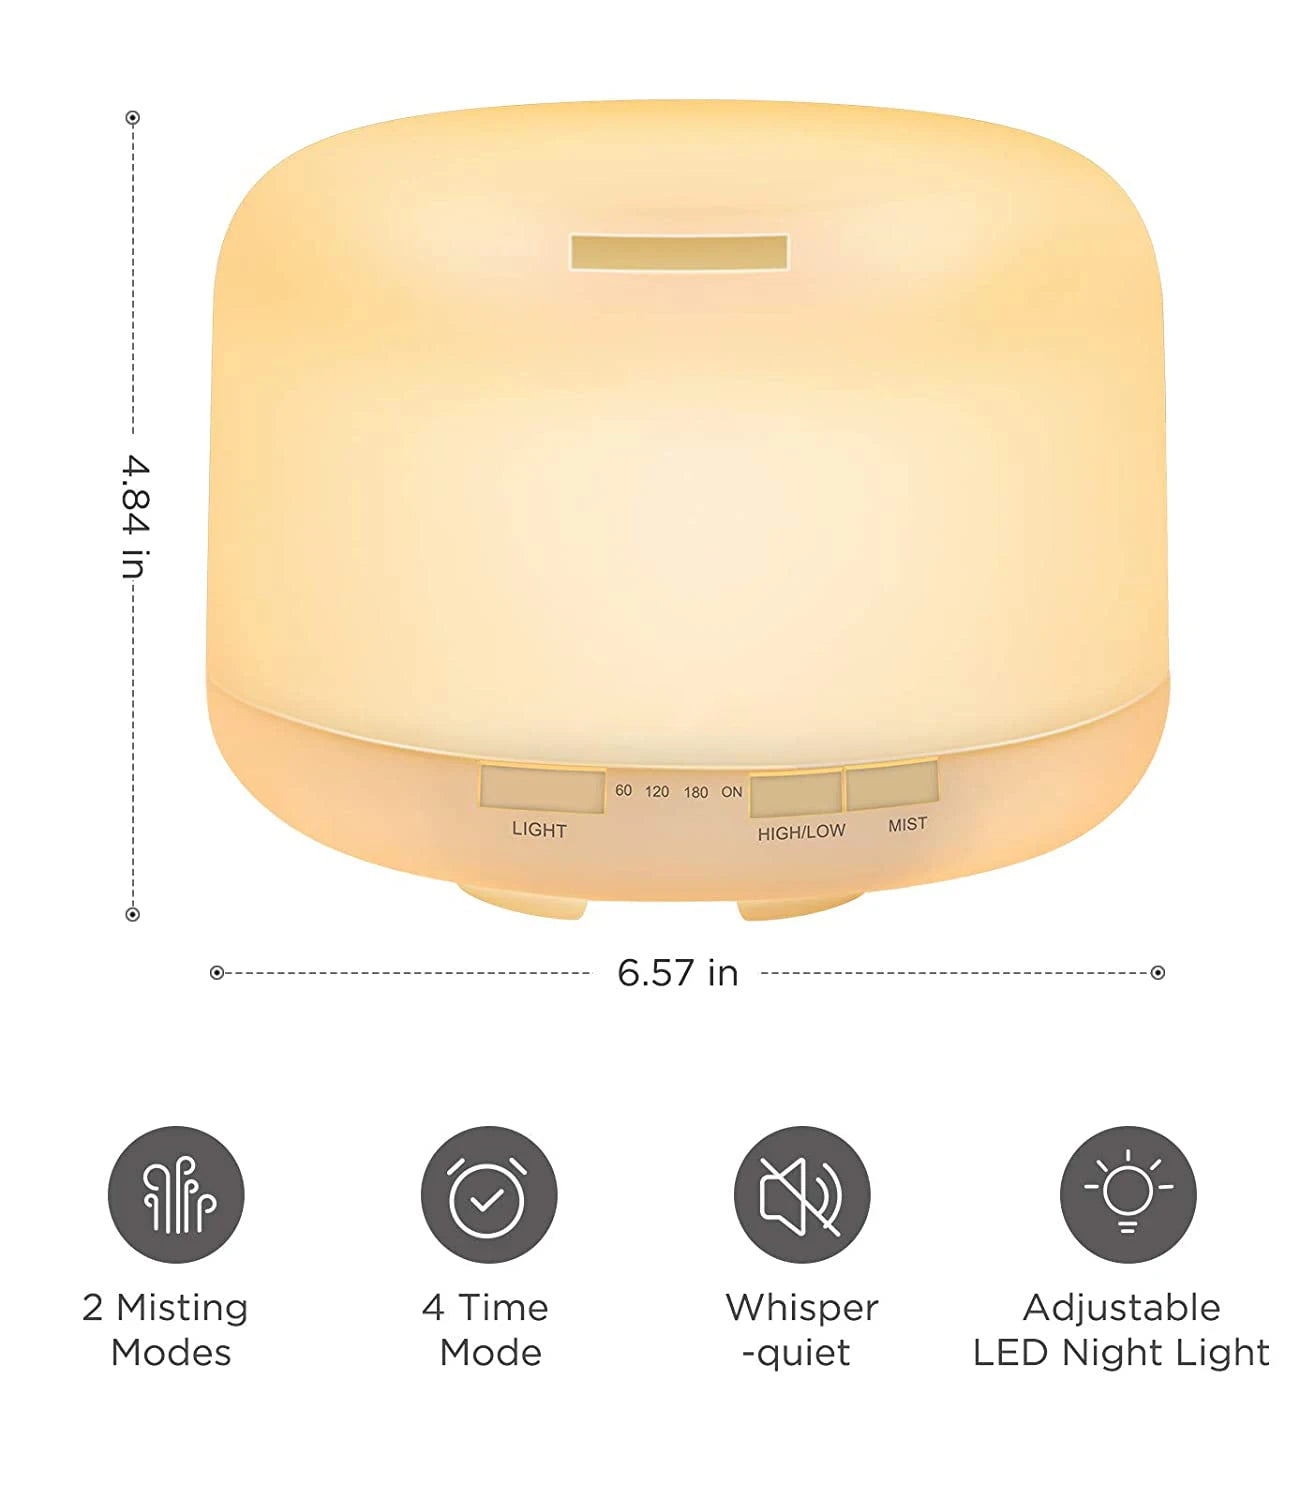 Fangin 500ML Air Humidifier USB Aroma Diffuser With 7 LED Lights